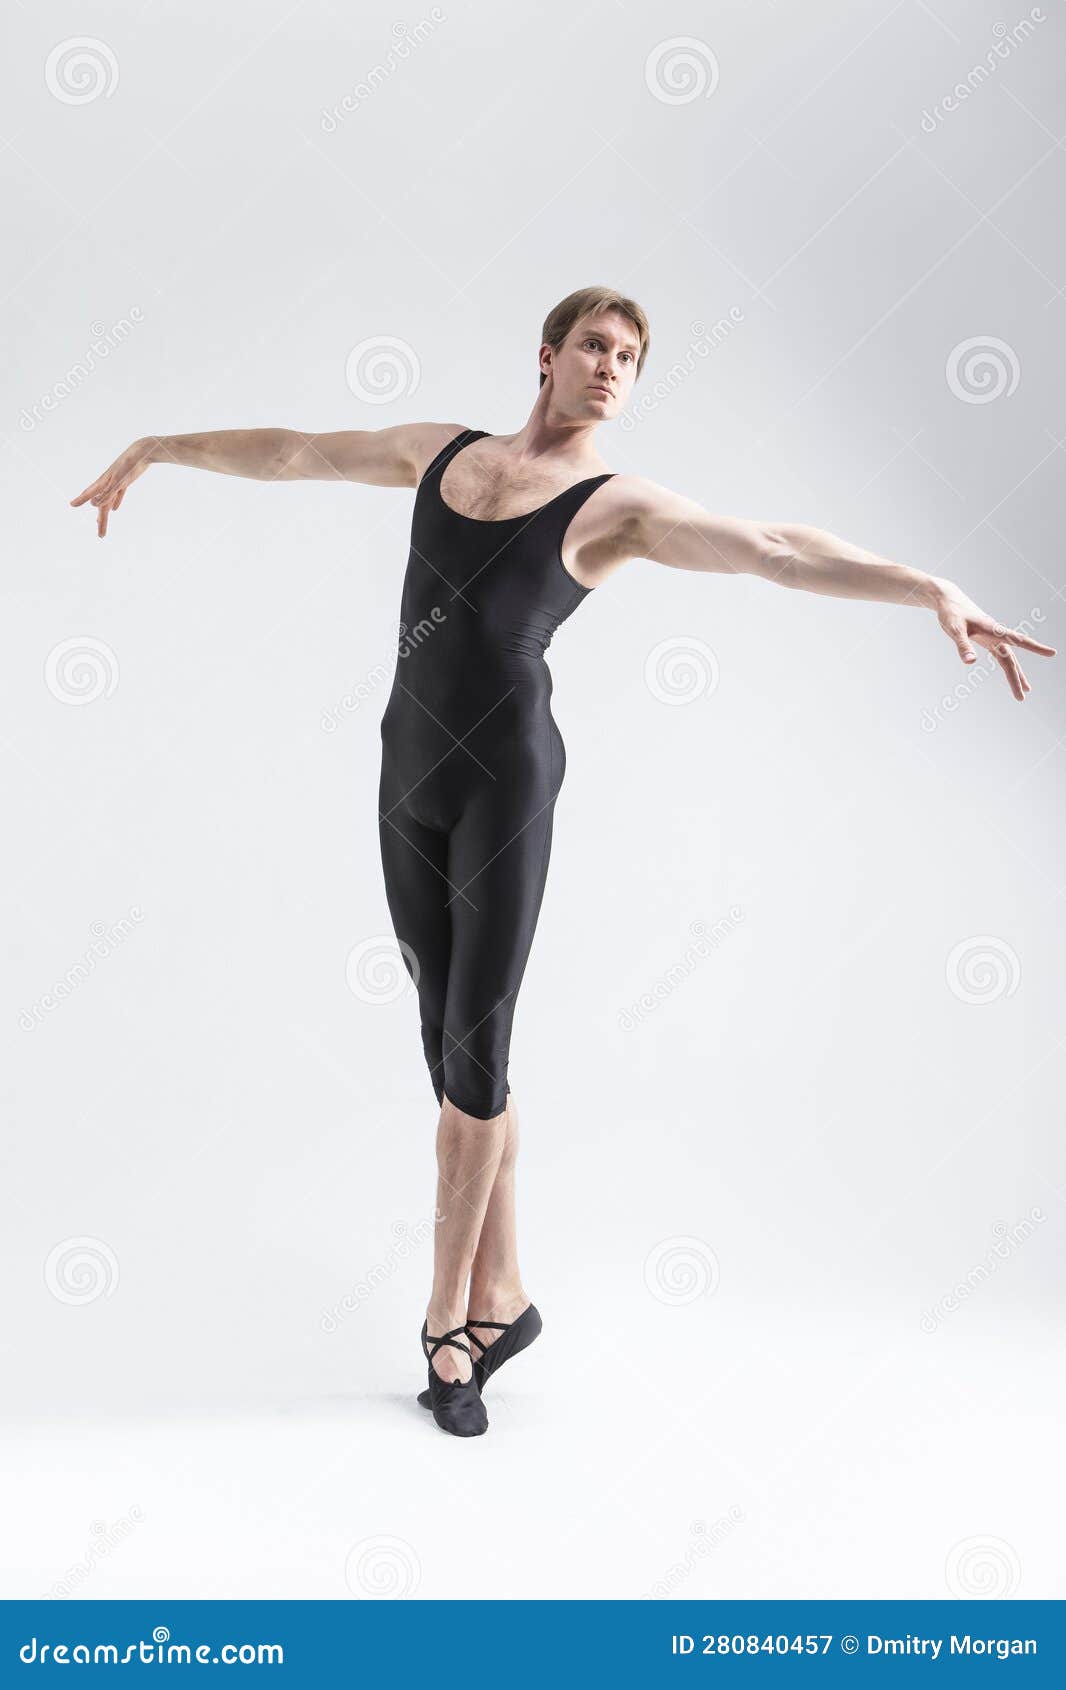 Male ballet poses Royalty Free Vector Image - VectorStock